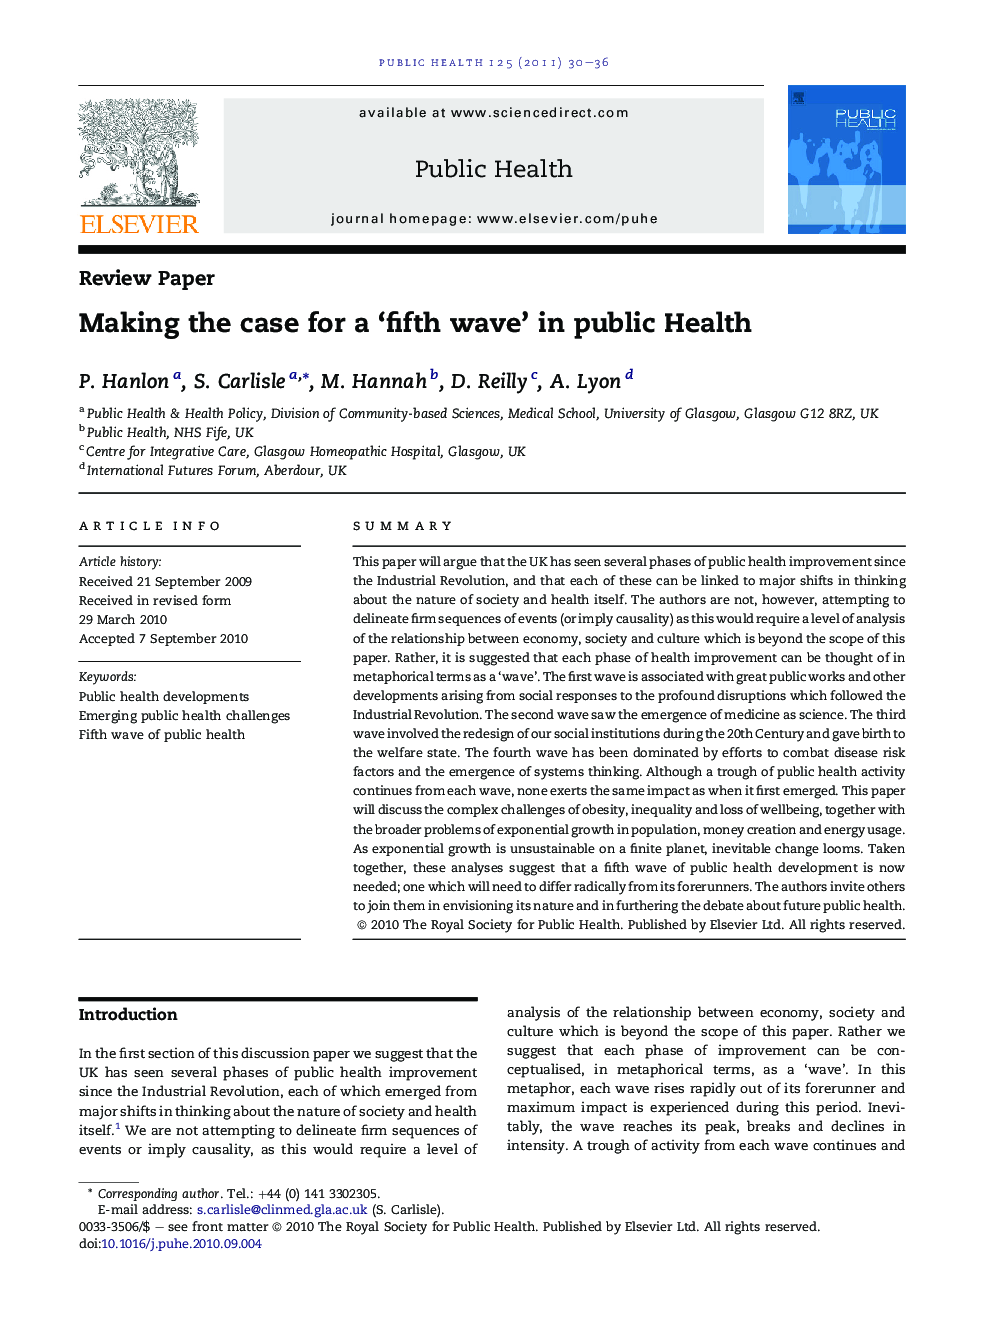 Making the case for a ‘fifth wave’ in public Health